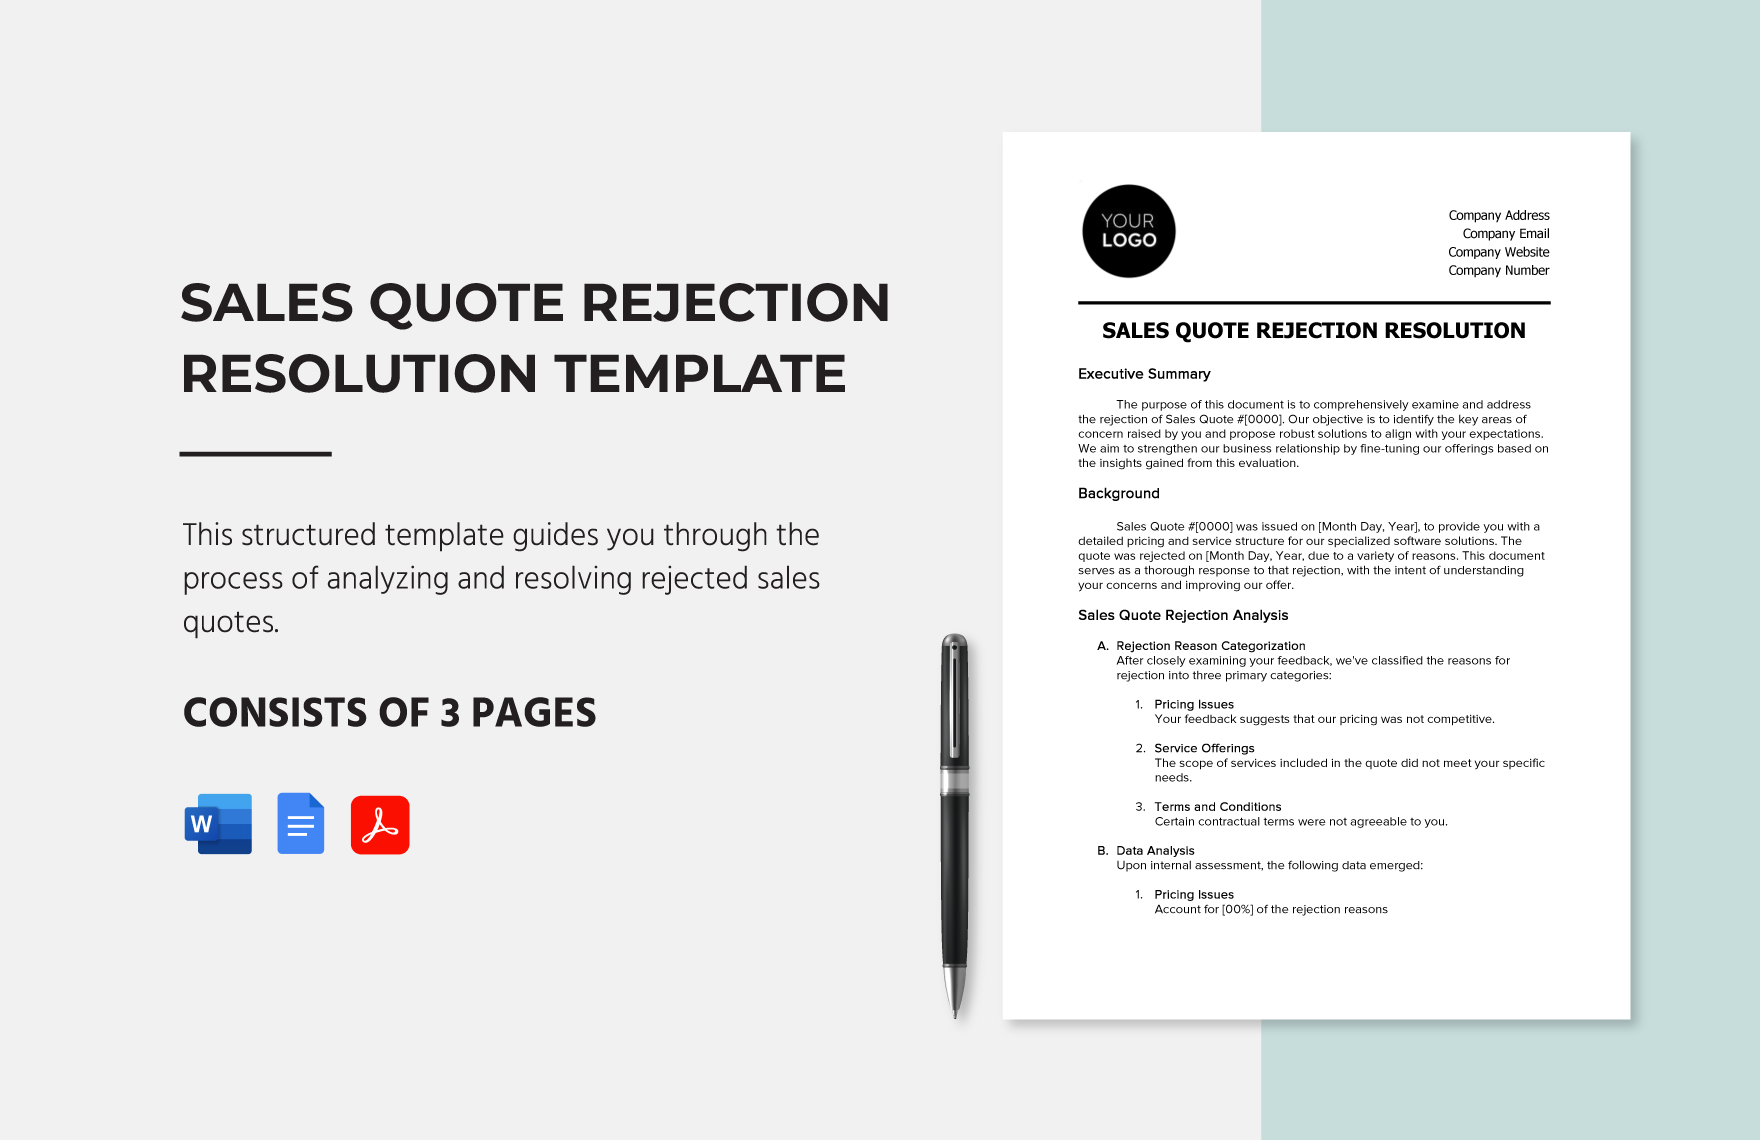 Sales Quote Rejection Resolution Template